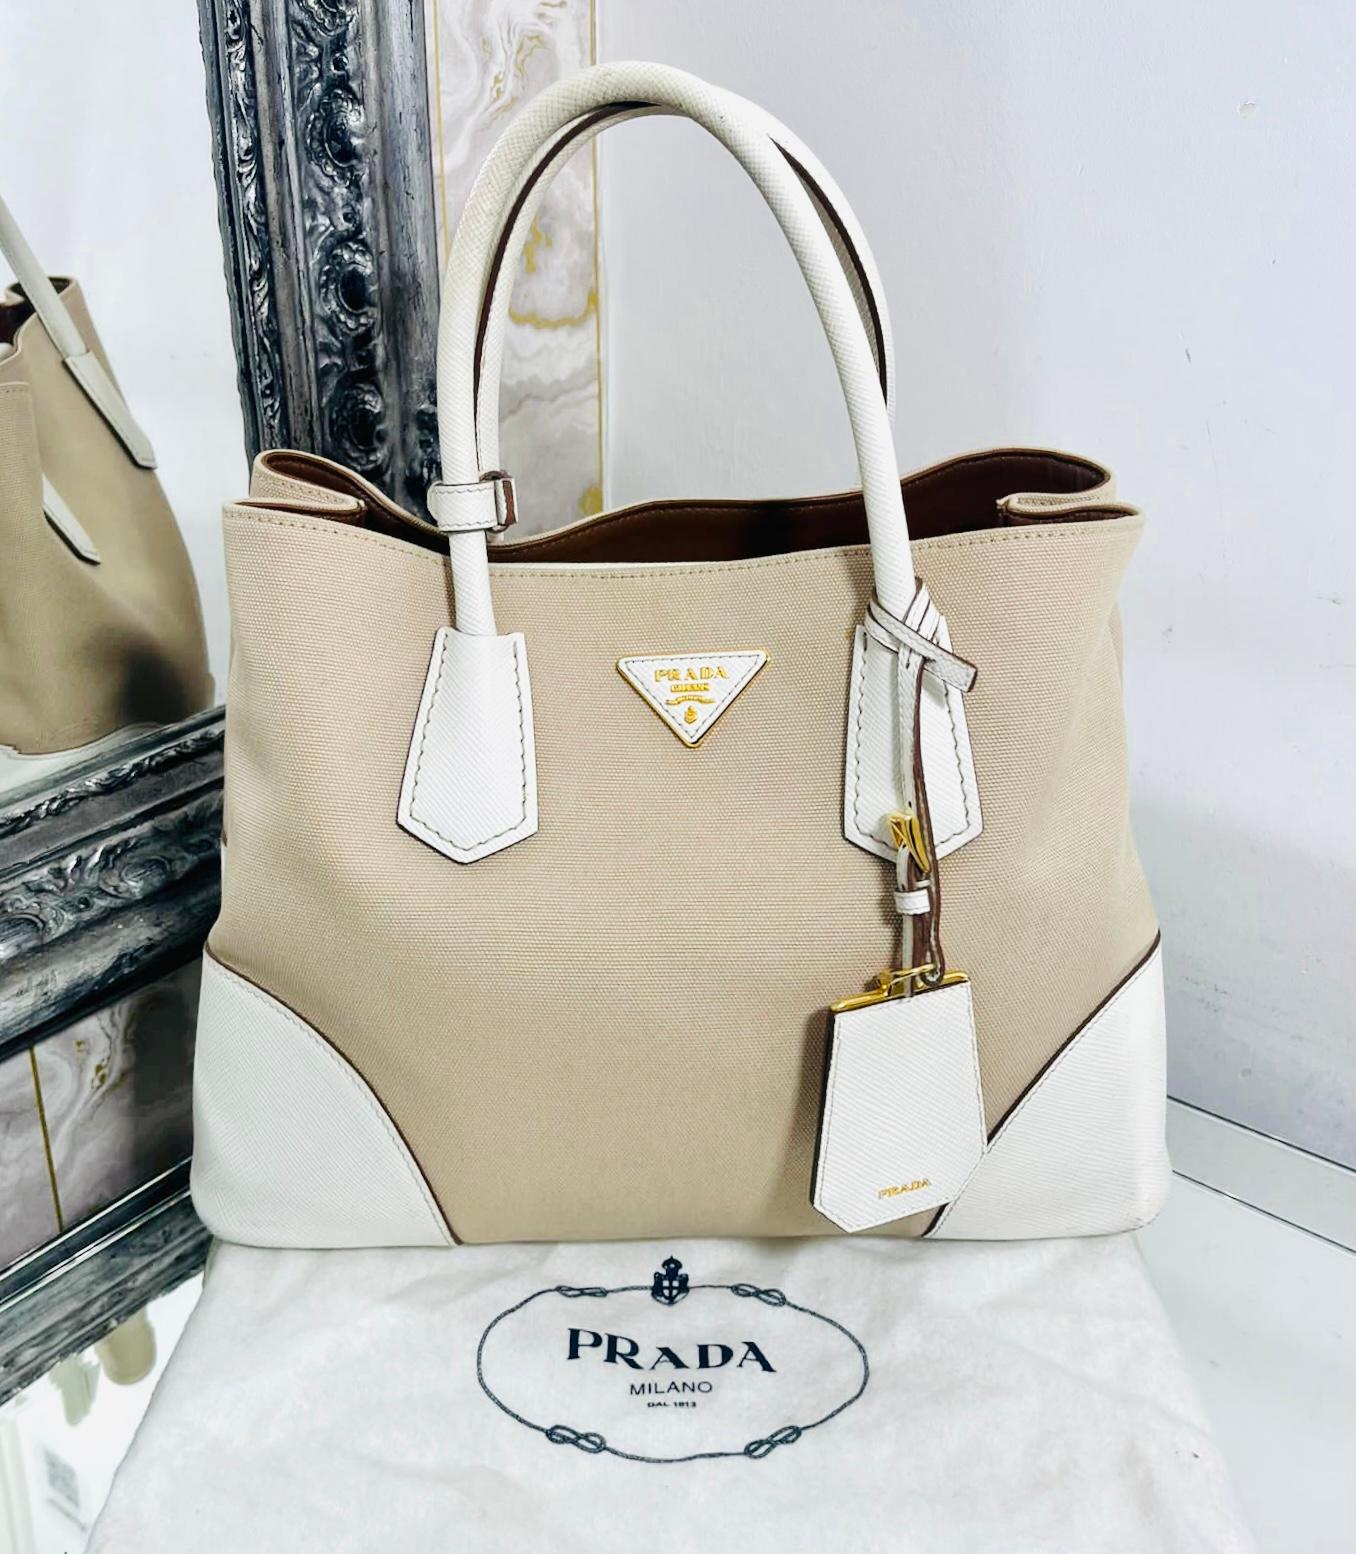 Prada Double Cuir Saffiano Leather & Canvas Tote Bag

Beige handbag designed with white leather corners and rolled top handles.

Detailed with signature gold  'Prada' logo engraved triangle and white leather name tag.

Featuring leather lining with